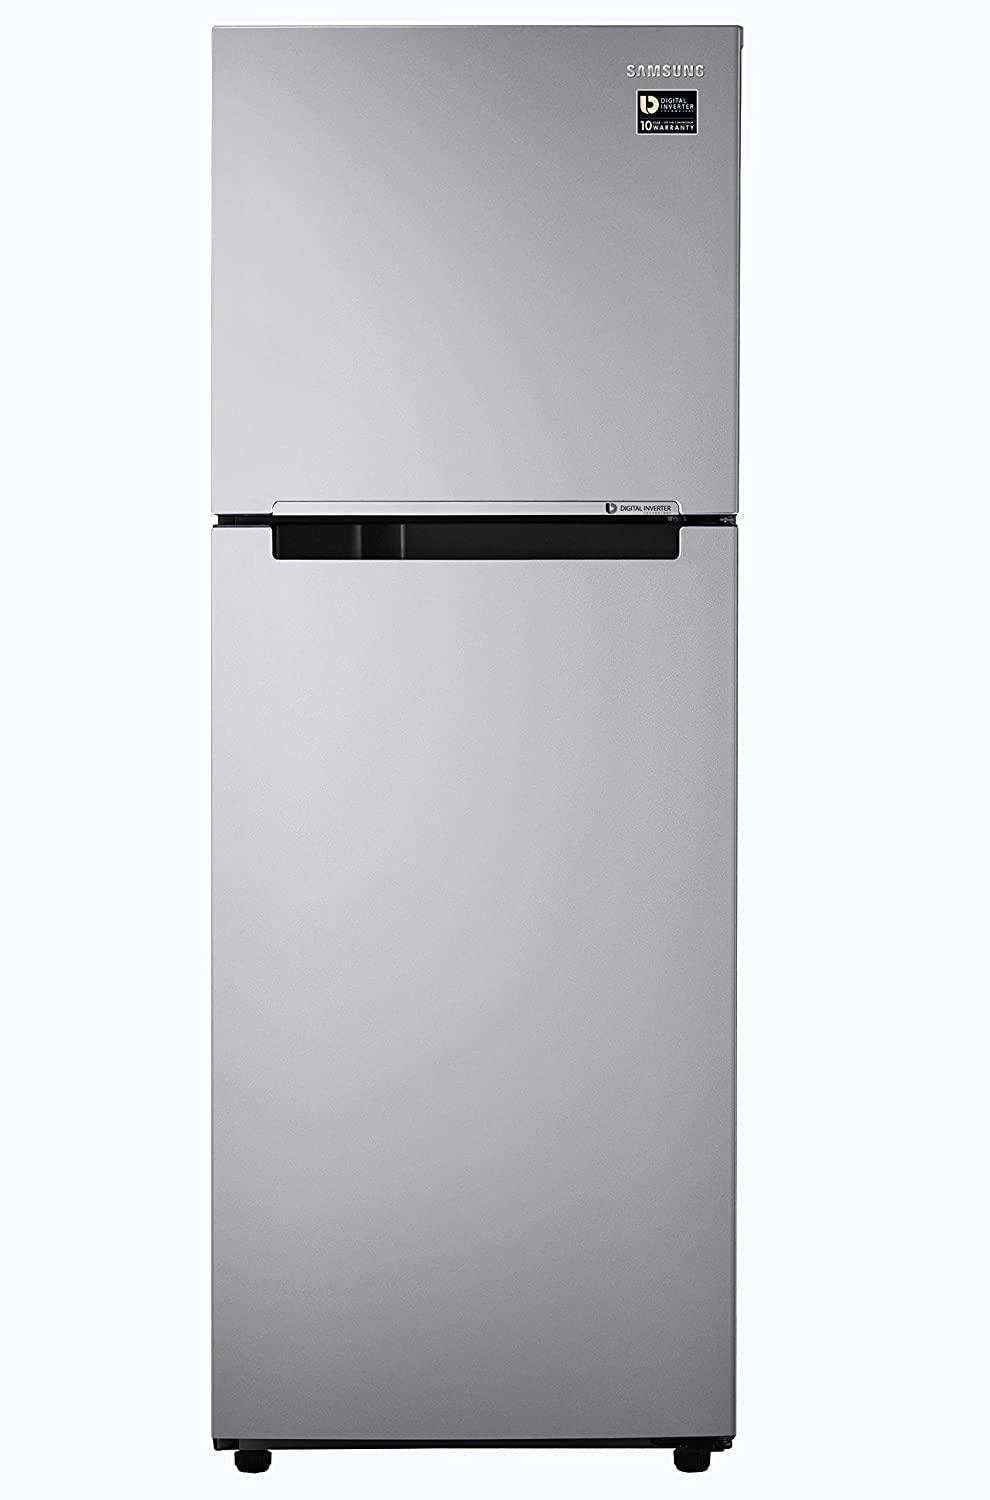 Click to open expanded view Samsung 253 L 2 Star Inverter Frost-Free Double Door Refrigerator (RT28A3022GS/HL, Gray Silver)